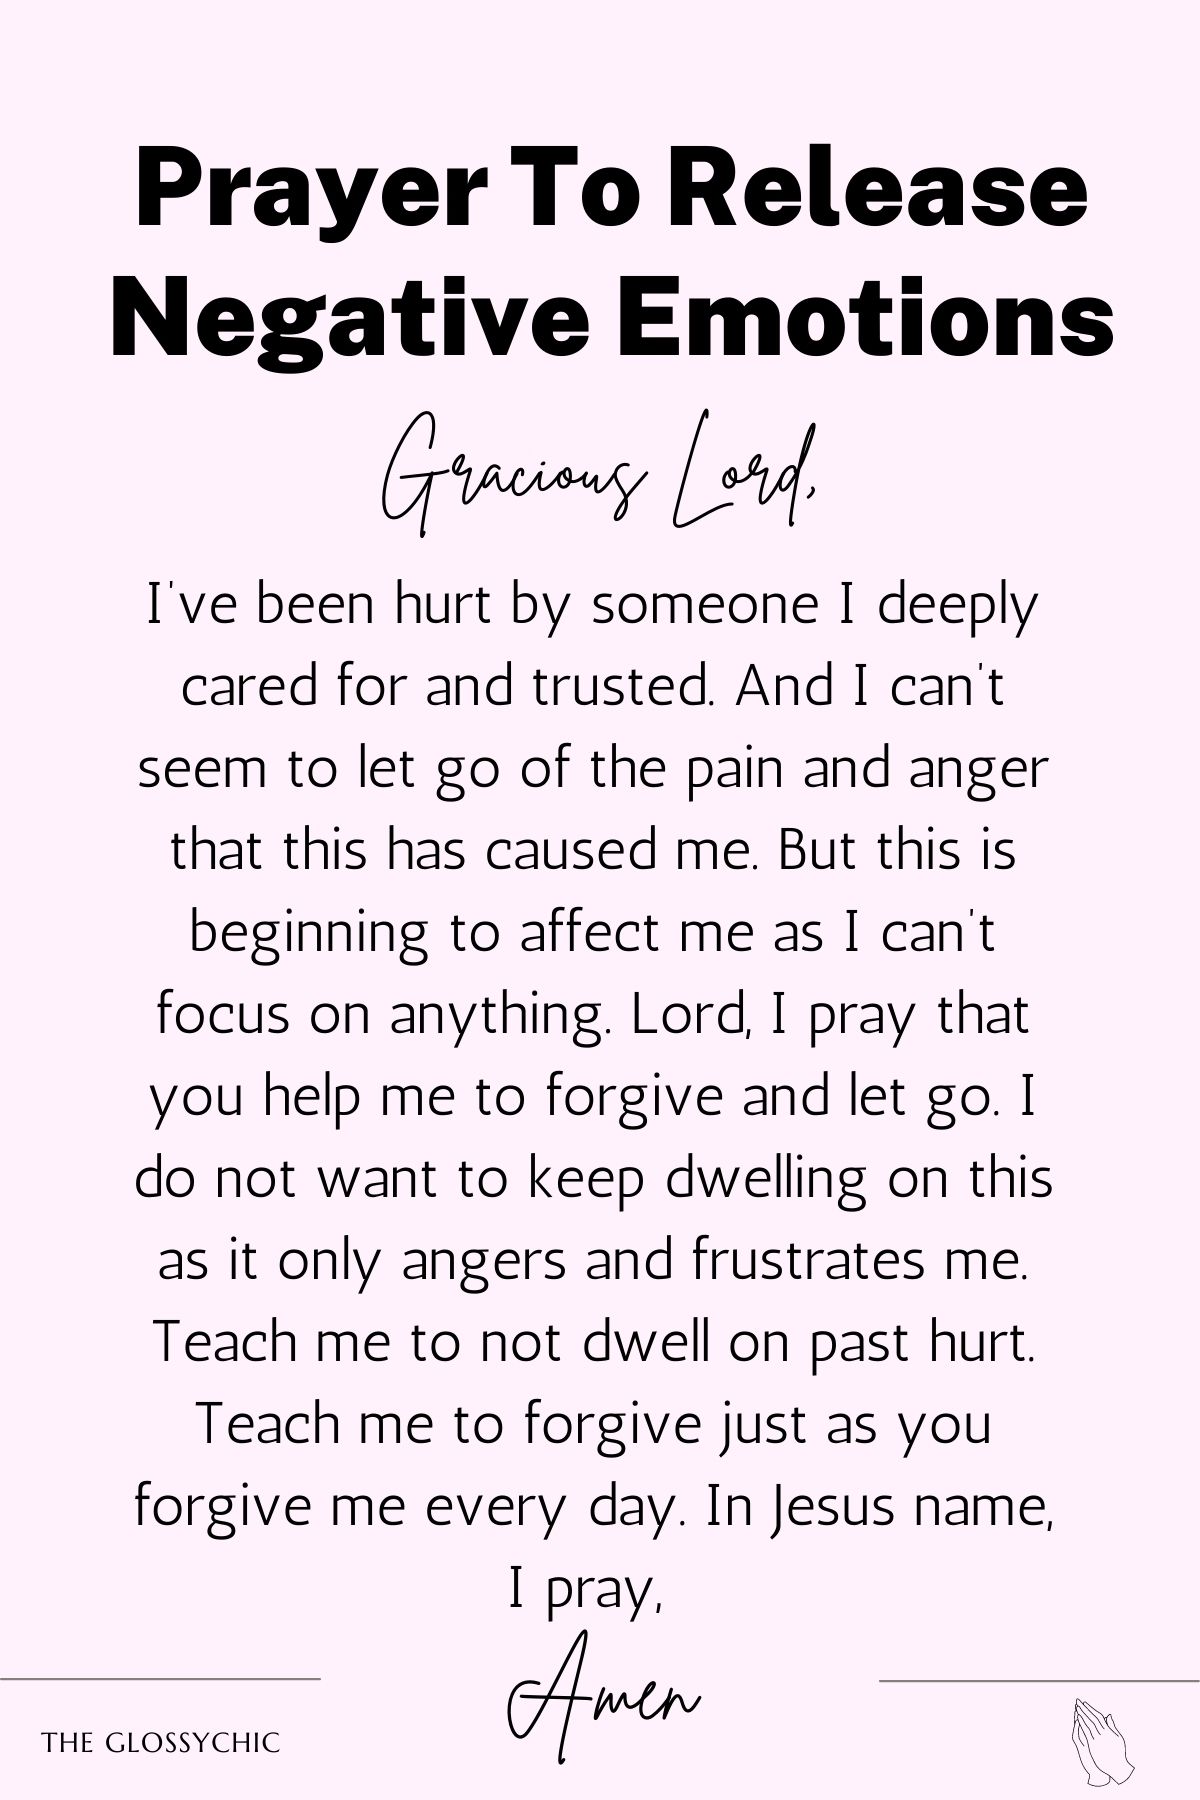 Prayer To Release Negative Emotions